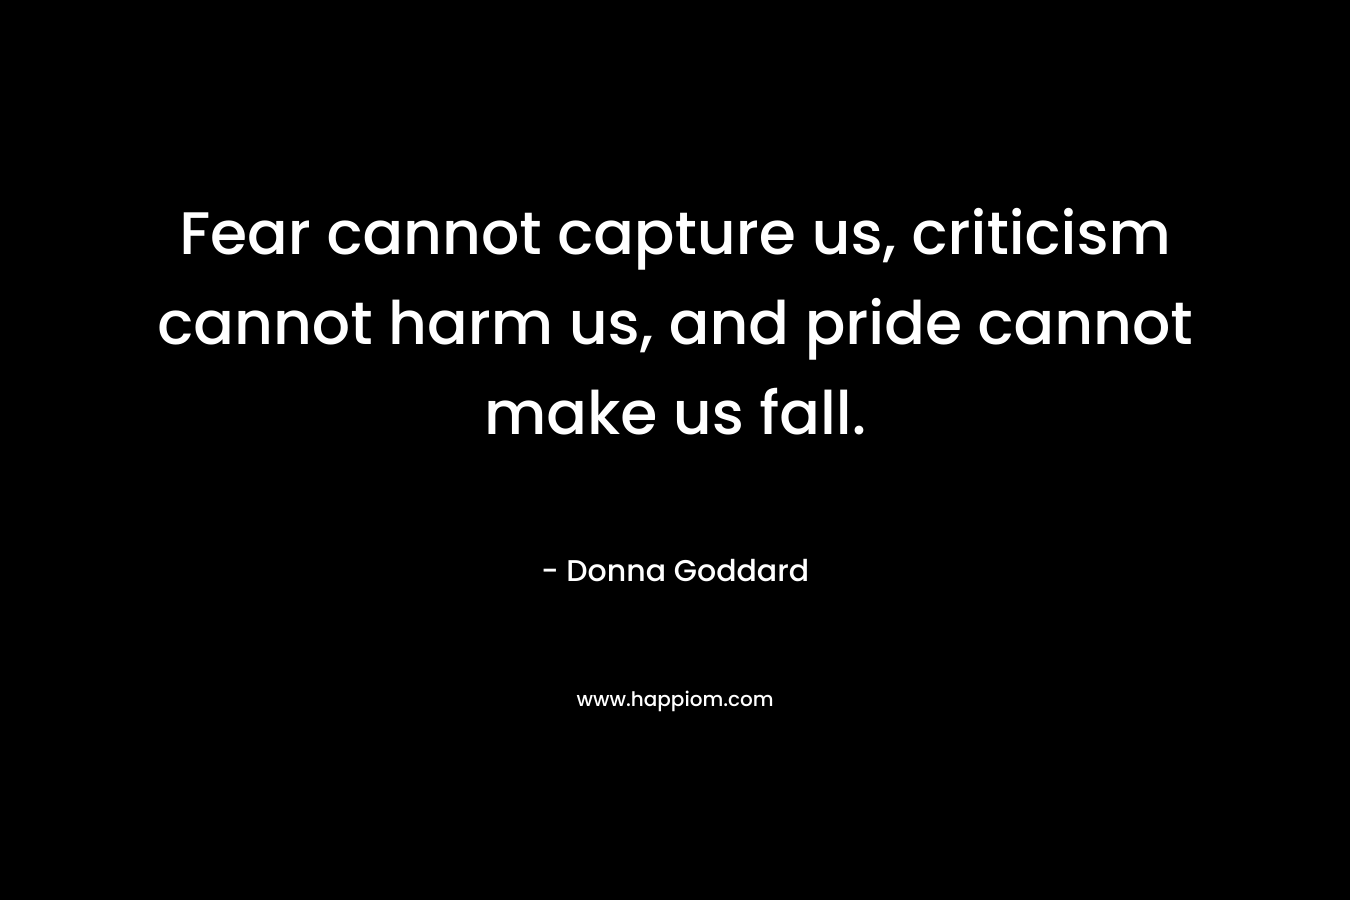 Fear cannot capture us, criticism cannot harm us, and pride cannot make us fall.